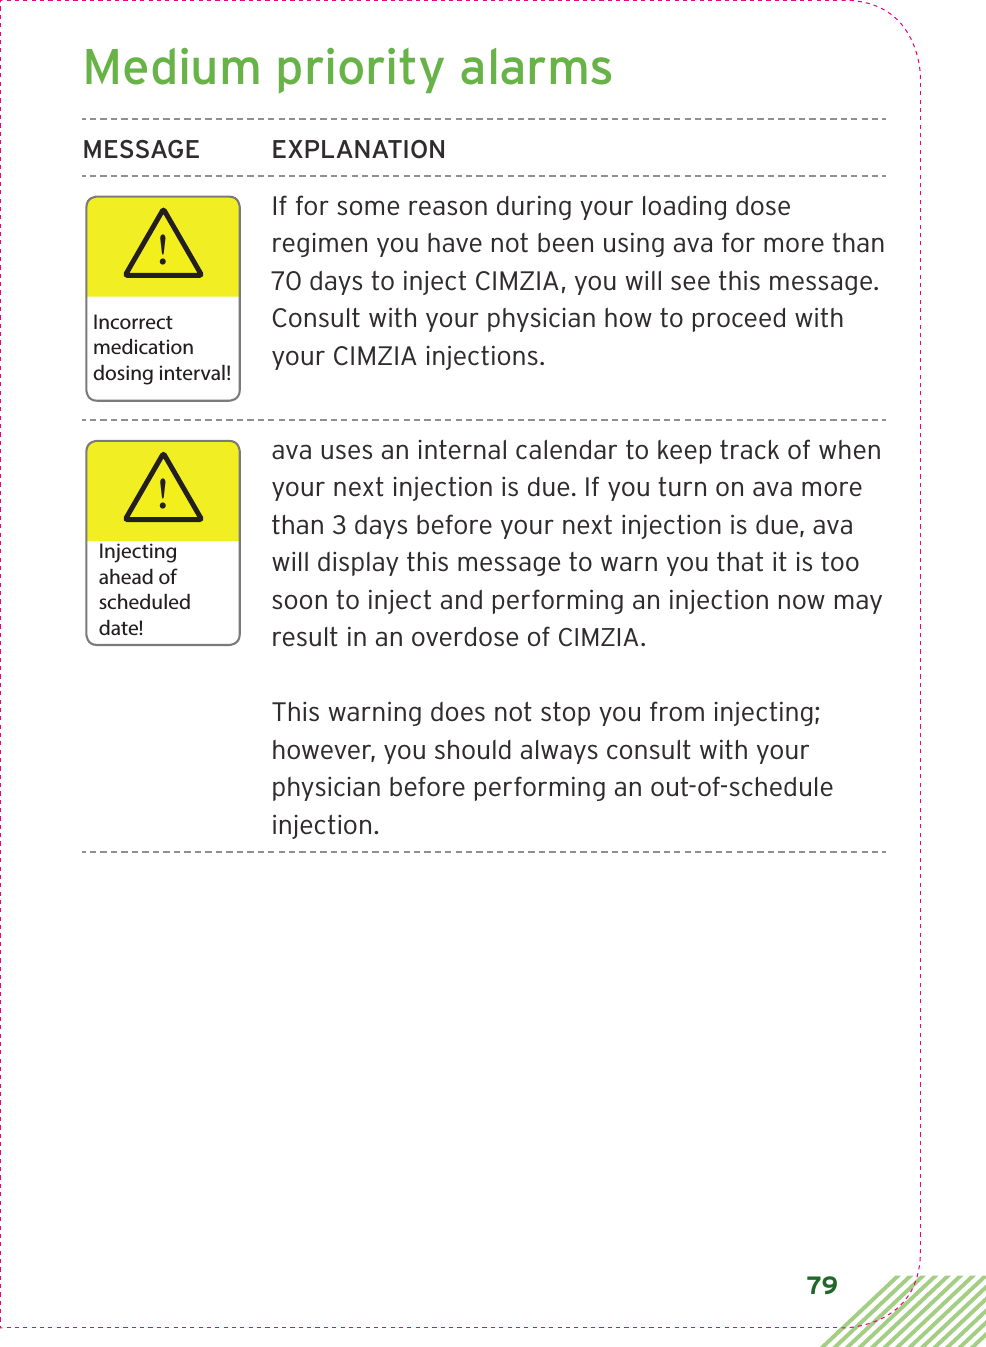 79Medium priority alarmsMESSAGE EXPLANATIONIf for some reason during your loading dose regimen you have not been using ava for more than 70 days to inject CIMZIA, you will see this message. Consult with your physician how to proceed with your CIMZIA injections.ava uses an internal calendar to keep track of when your next injection is due. If you turn on ava more than 3 days before your next injection is due, ava will display this message to warn you that it is too soon to inject and performing an injection now may result in an overdose of CIMZIA.This warning does not stop you from injecting; however, you should always consult with your physician before performing an out-of-schedule injection. !Incorrectmedicationdosing interval!!Injecting ahead of scheduled date!